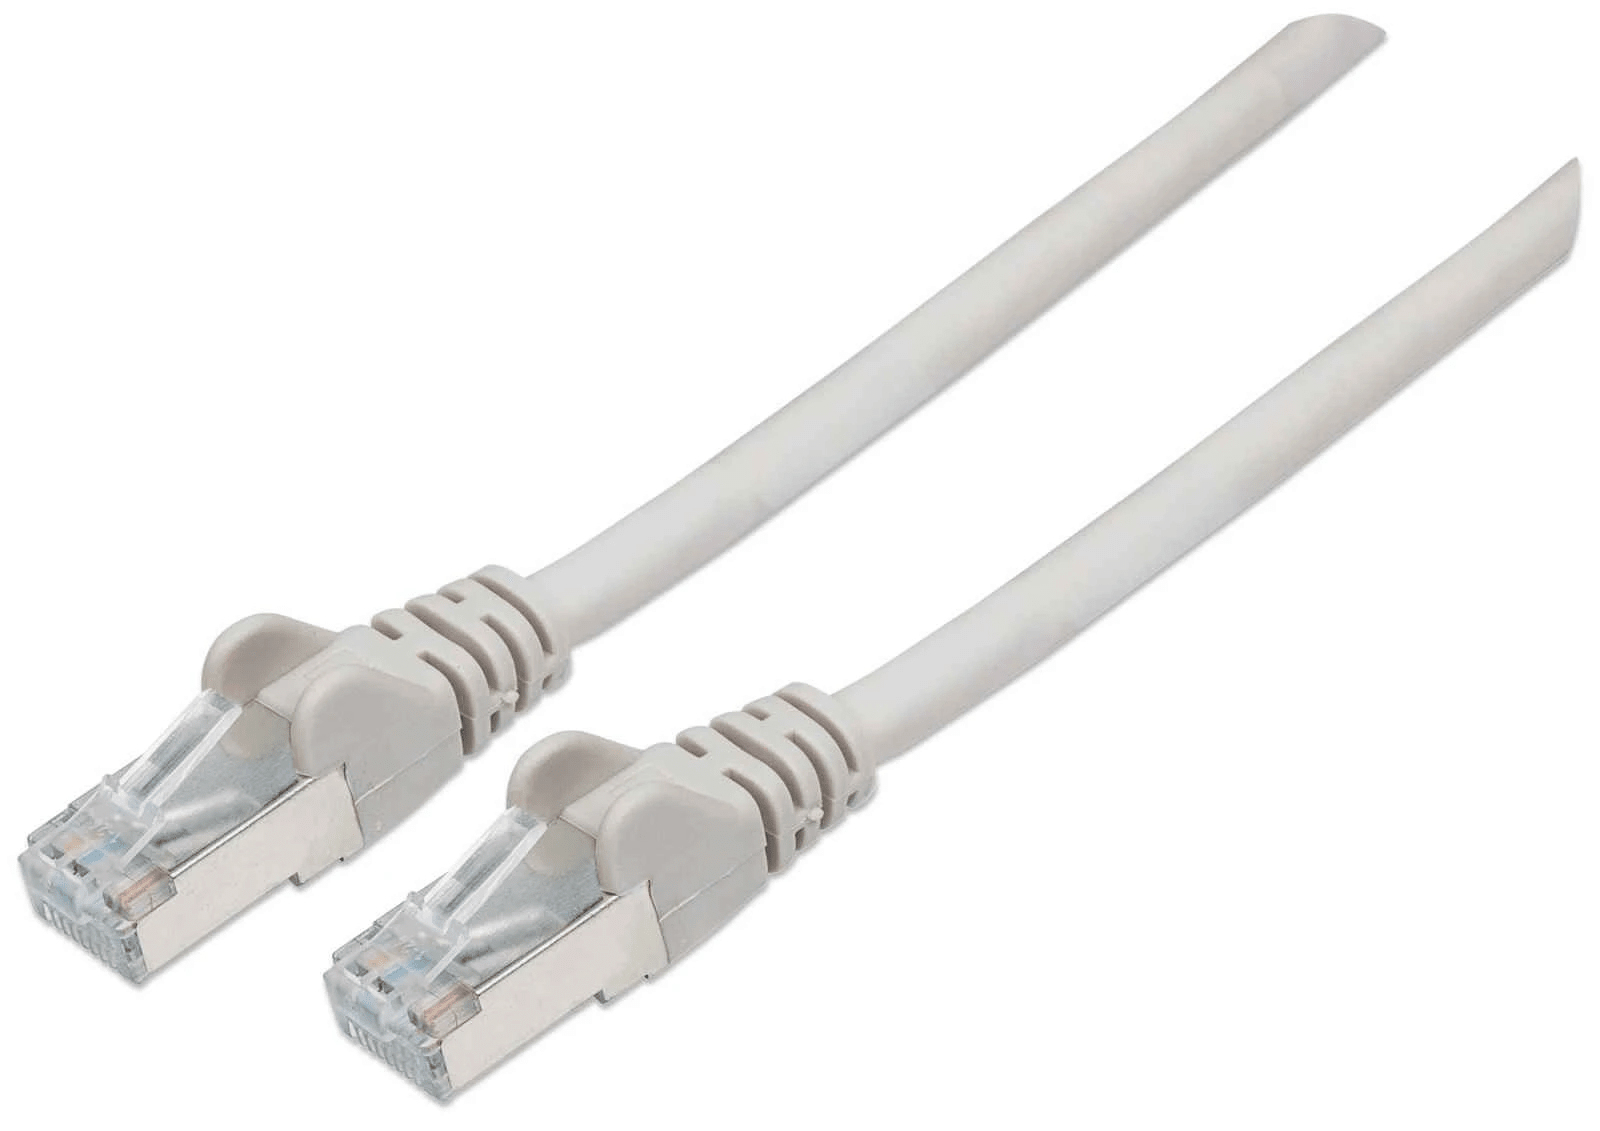 Photos - Cable (video, audio, USB) INTELLINET Network Patch Cable, Cat7 Cable/Cat6A Plugs, 1m, Grey, Copp 740 